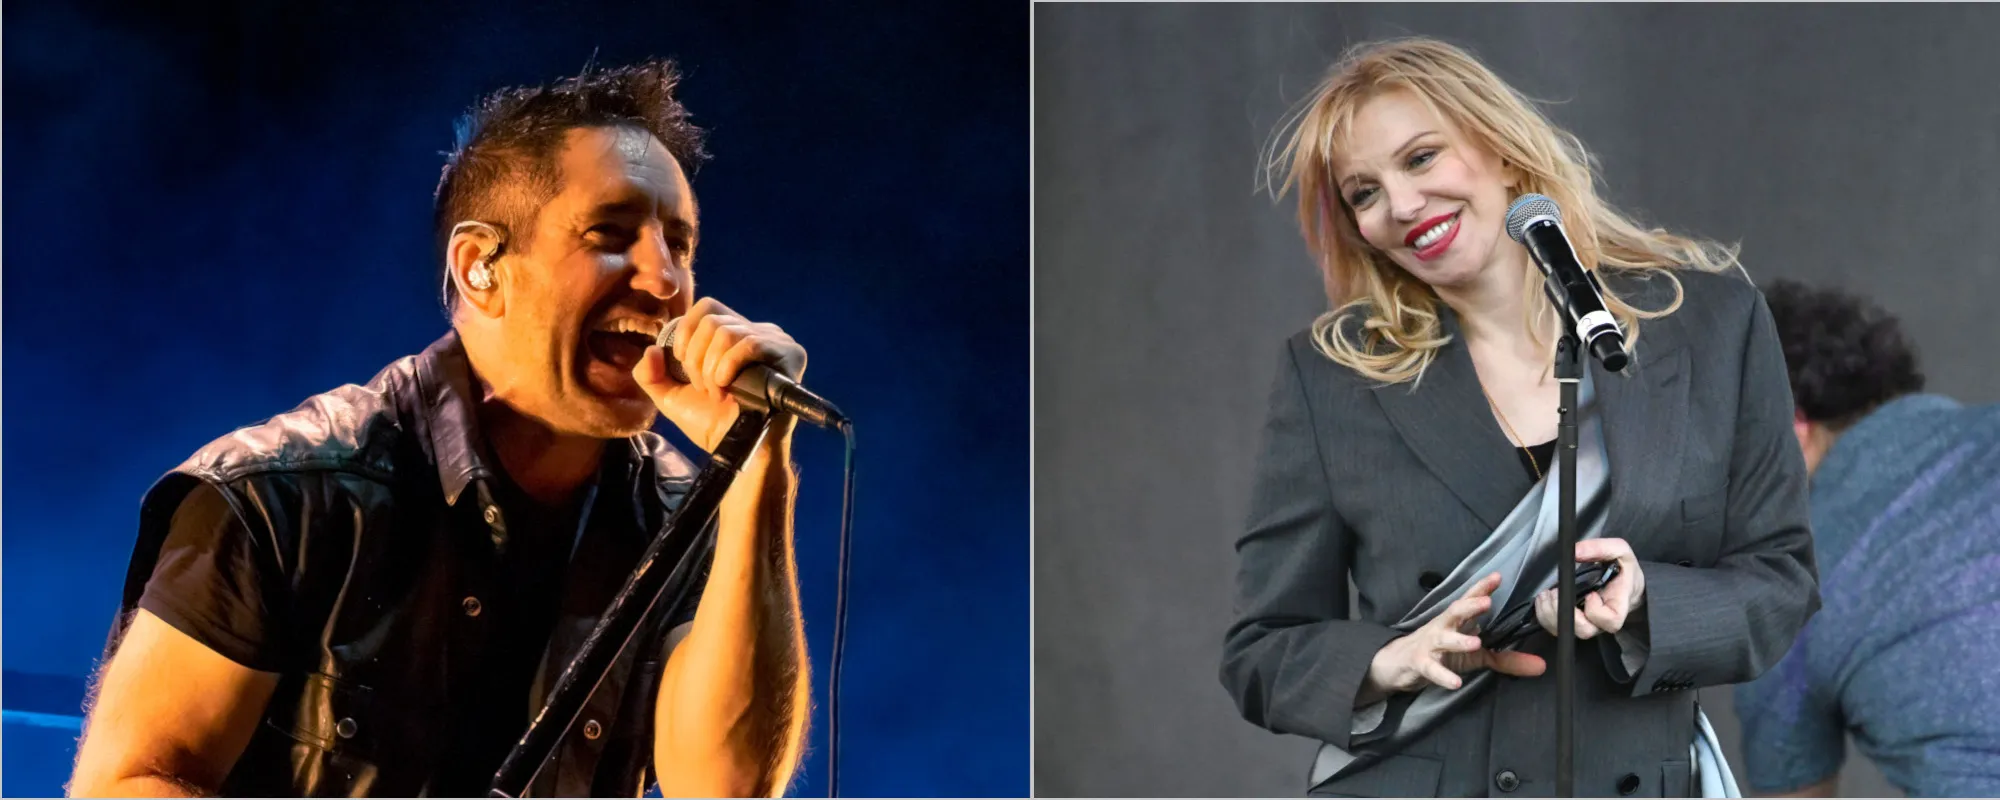 Behind the Beef: Trent Reznor and Courtney Love’s Distaste